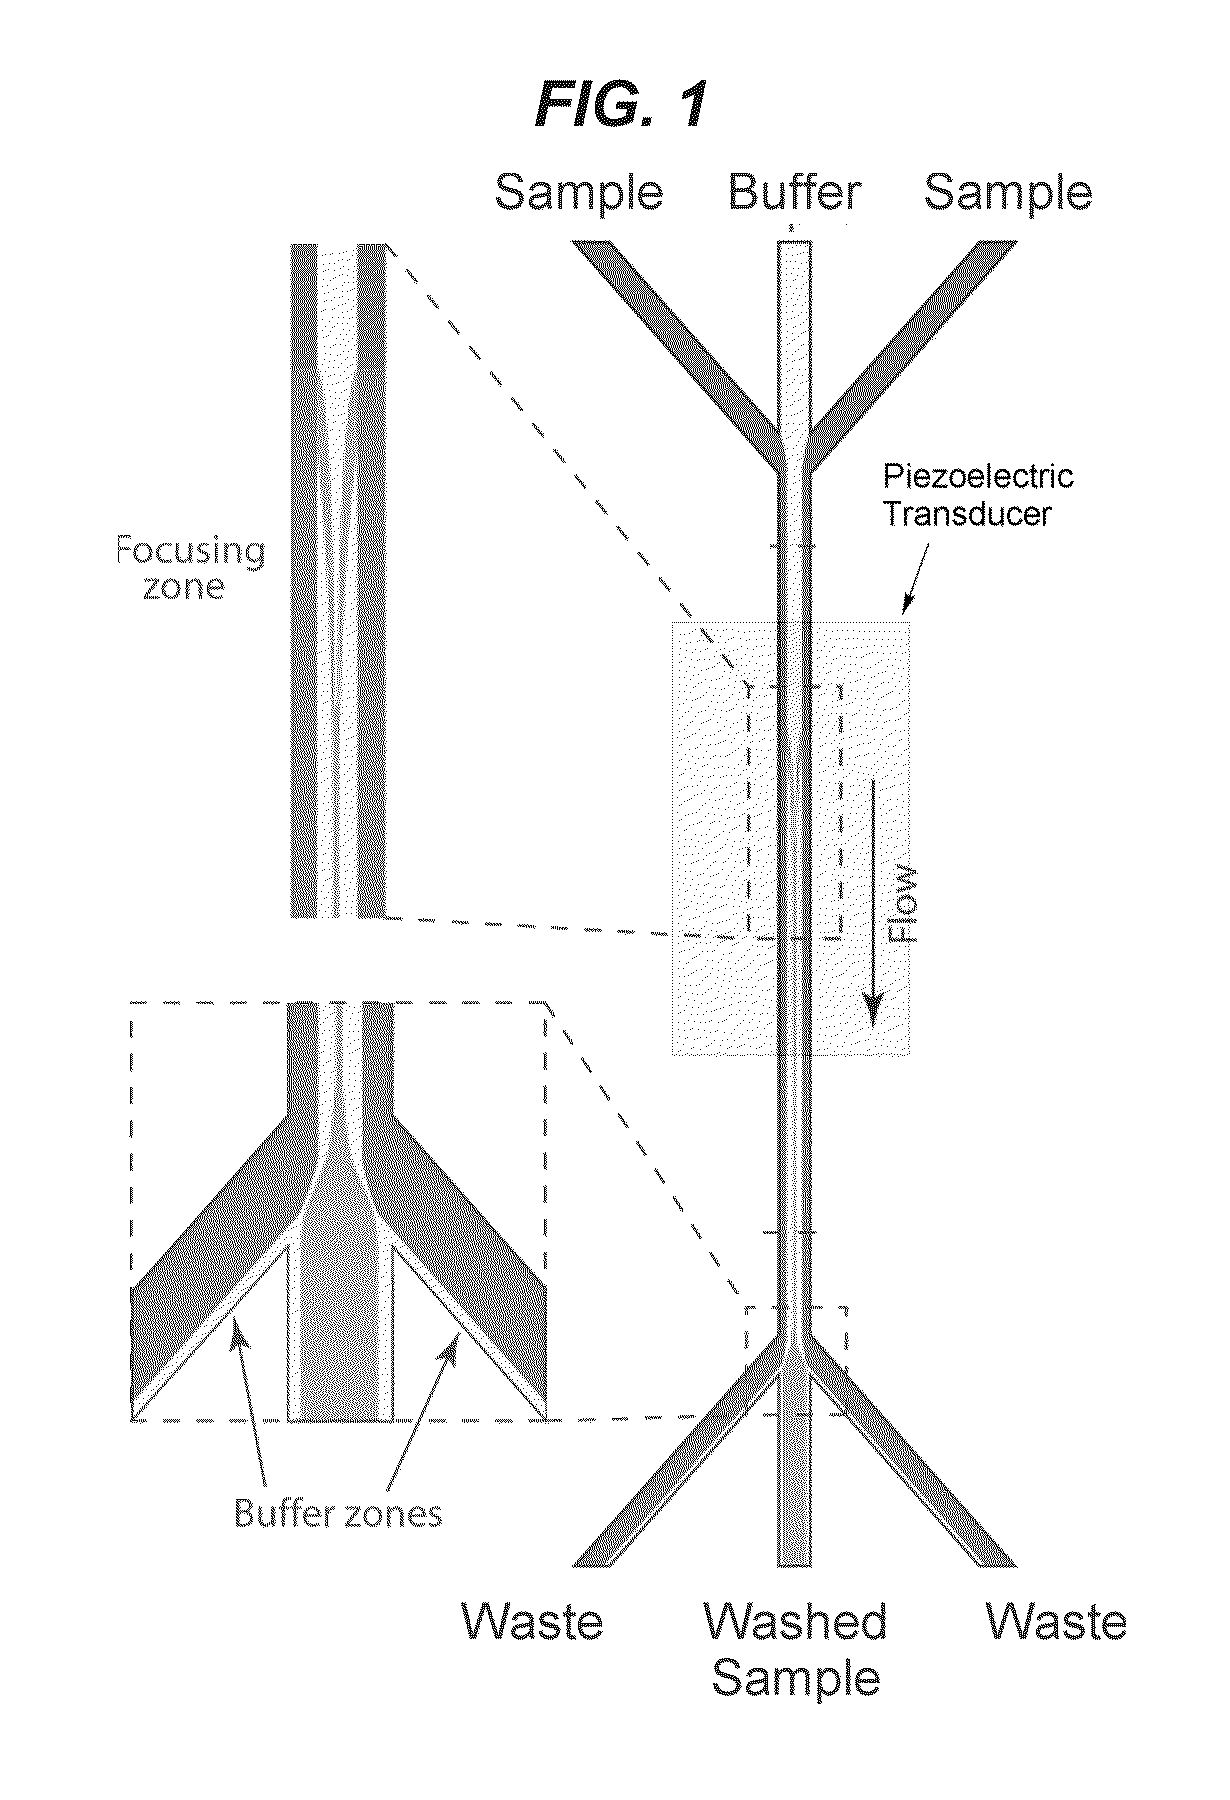 Fluid exchange methods and devices